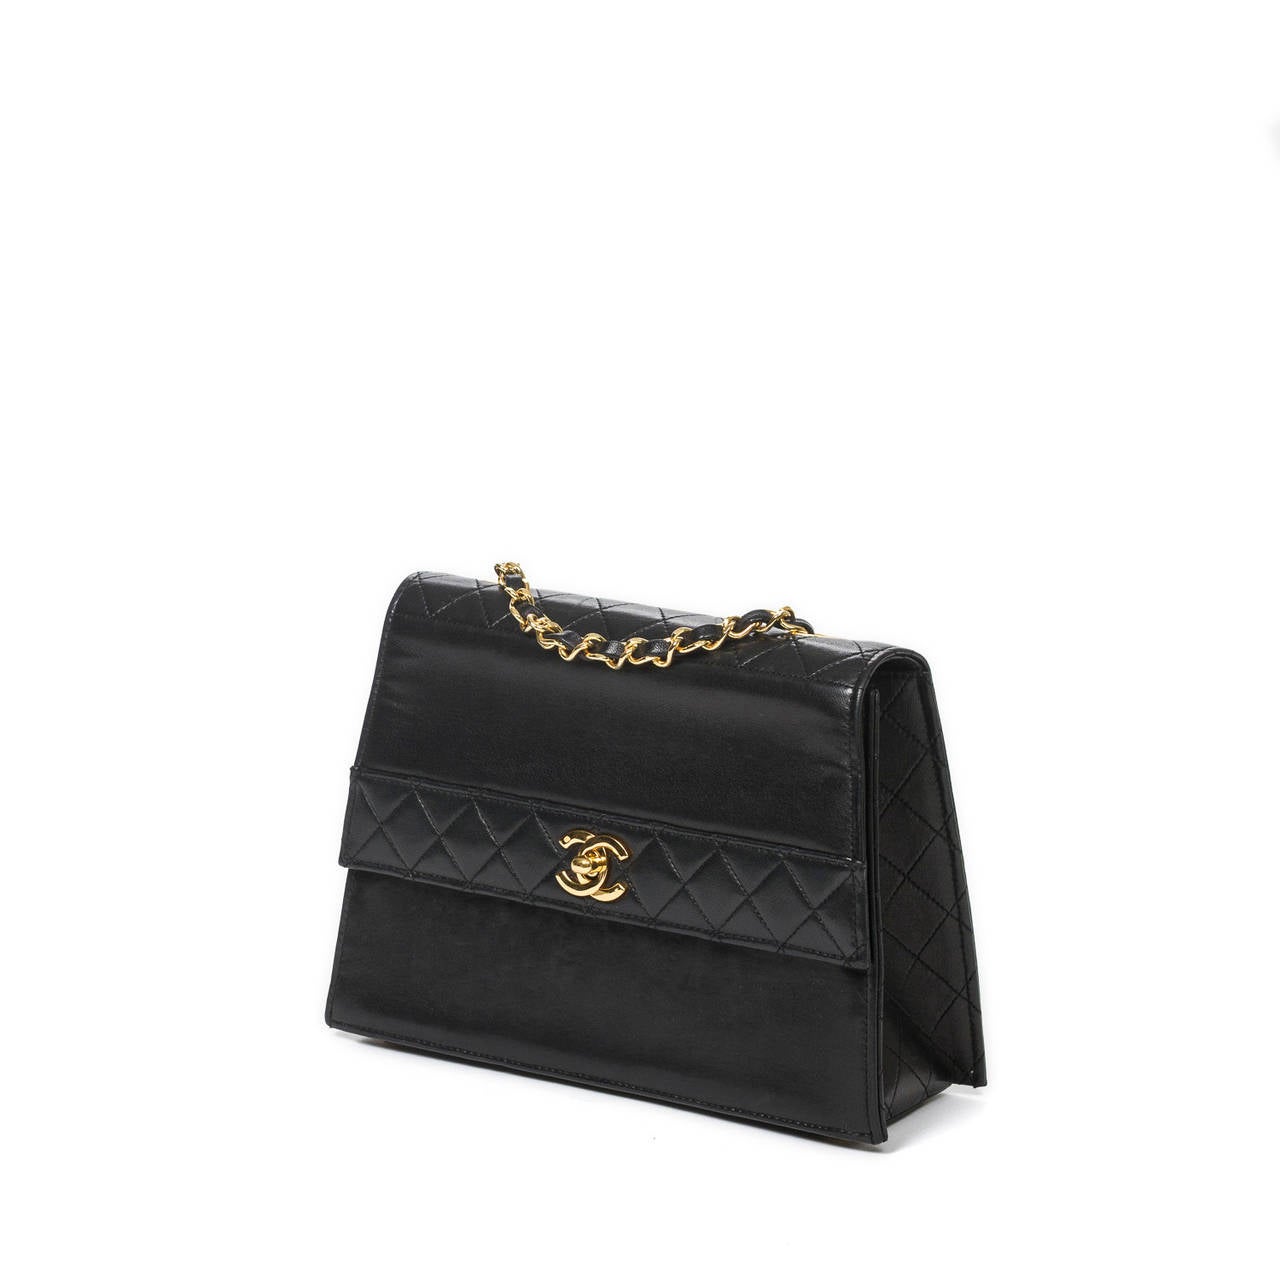 Chanel Rare Vintage Flap shoulder bag in black leather with gold tone chain strap interlaced with black leather, CC turnlock. Burgundy leather interior with one zip pocket and one slip pocket, authentification sticker. Dustbag included. Few scuffs